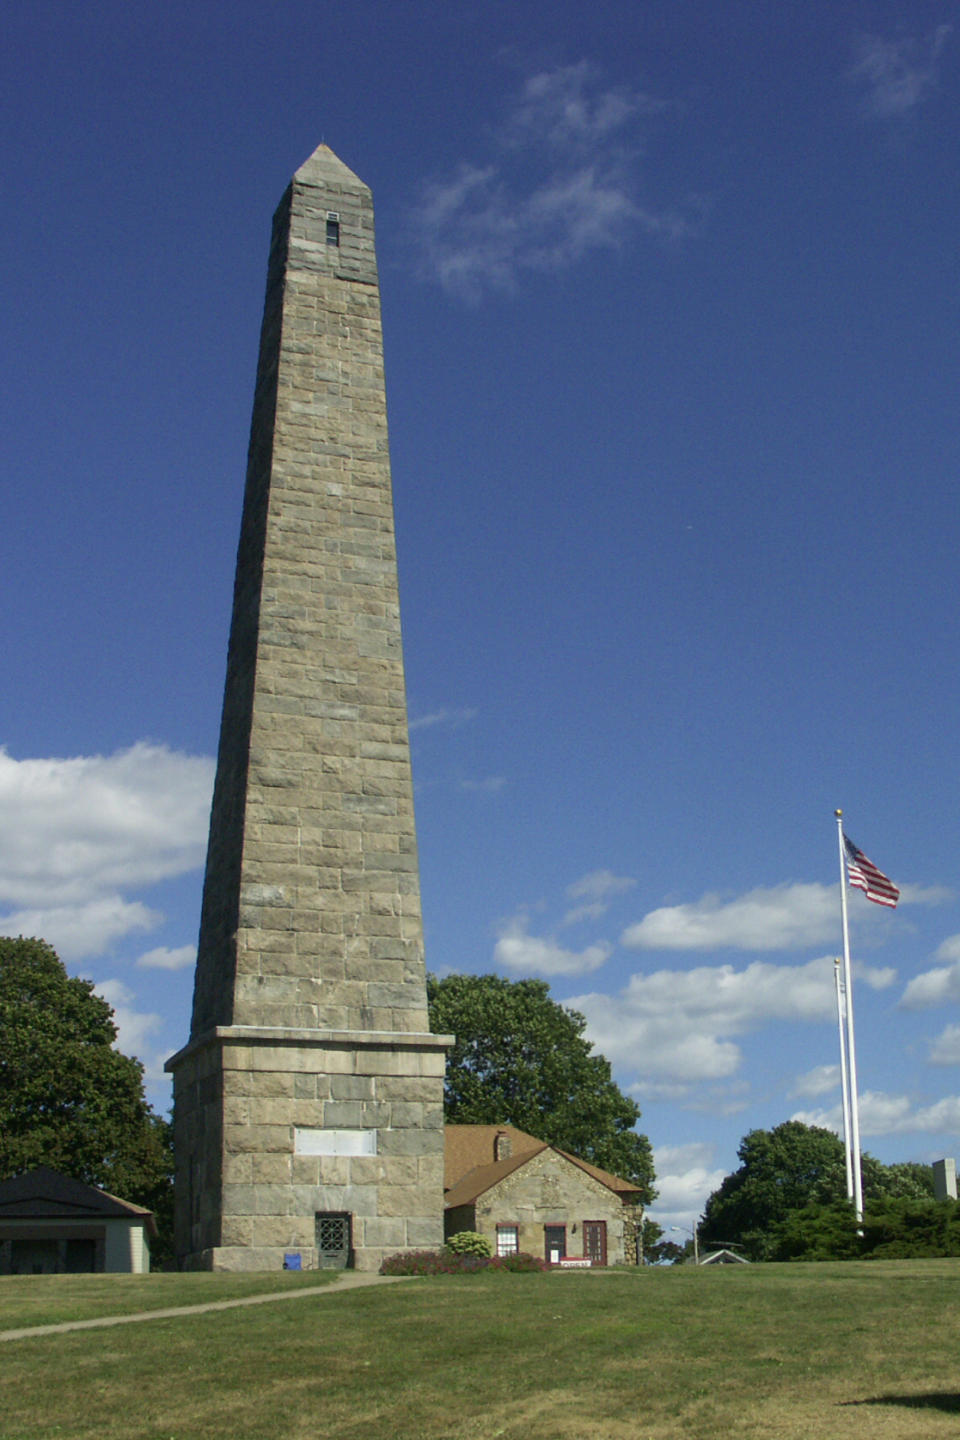 This undated photo provided by the State Parks Division of Connecticut's Department of Energy and Environment Protection shows the Groton Monument at Fort Griswold Battlefield State Park in Groton, Conn. The monument was erected around 1830 to commemorate a 1781 Revolutionary War battle in which British forces, commanded by Benedict Arnold, captured the fort and killed 88 of the 165 defenders. Visiting the park is one of a number of free things to see and do in Connecticut. (AP Photo/Connecticut State Parks, Paul Duarte)